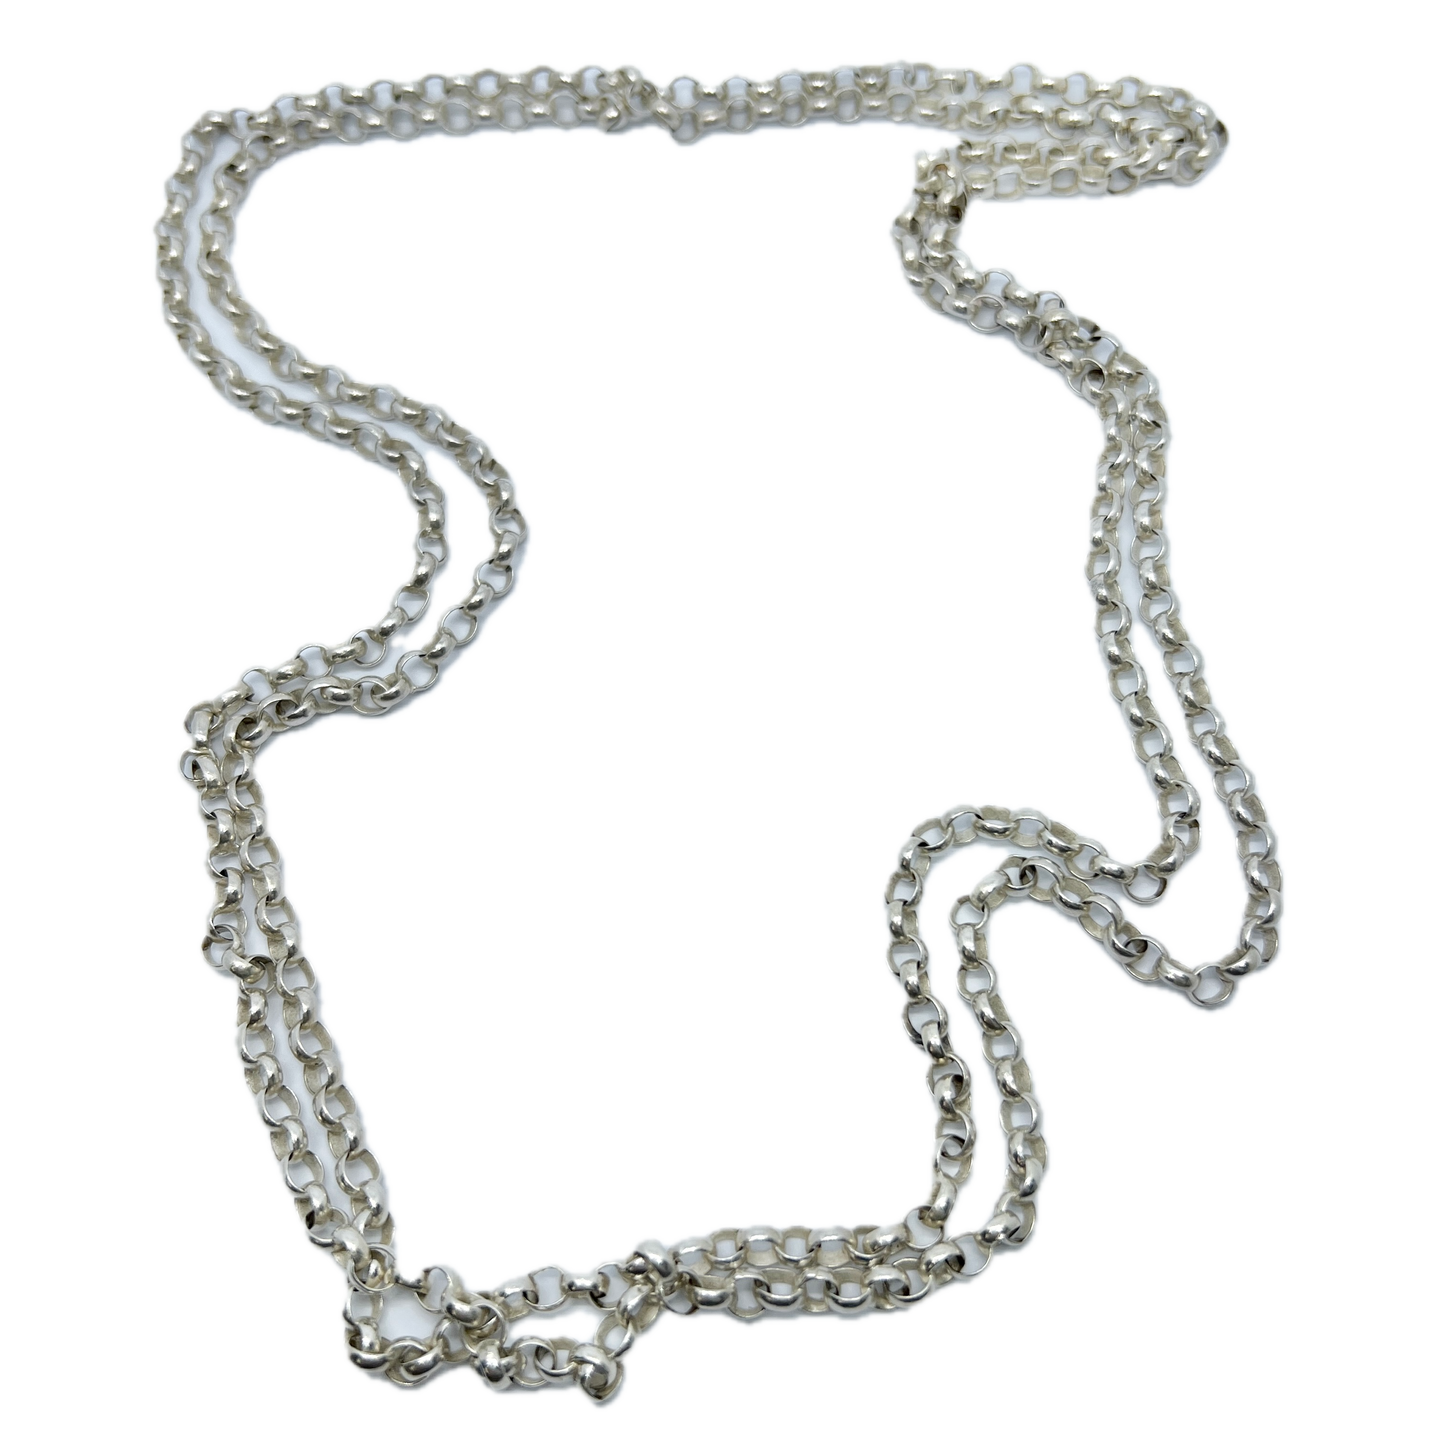 Antique Solid Silver 55 inch Longuard Chain Necklace.